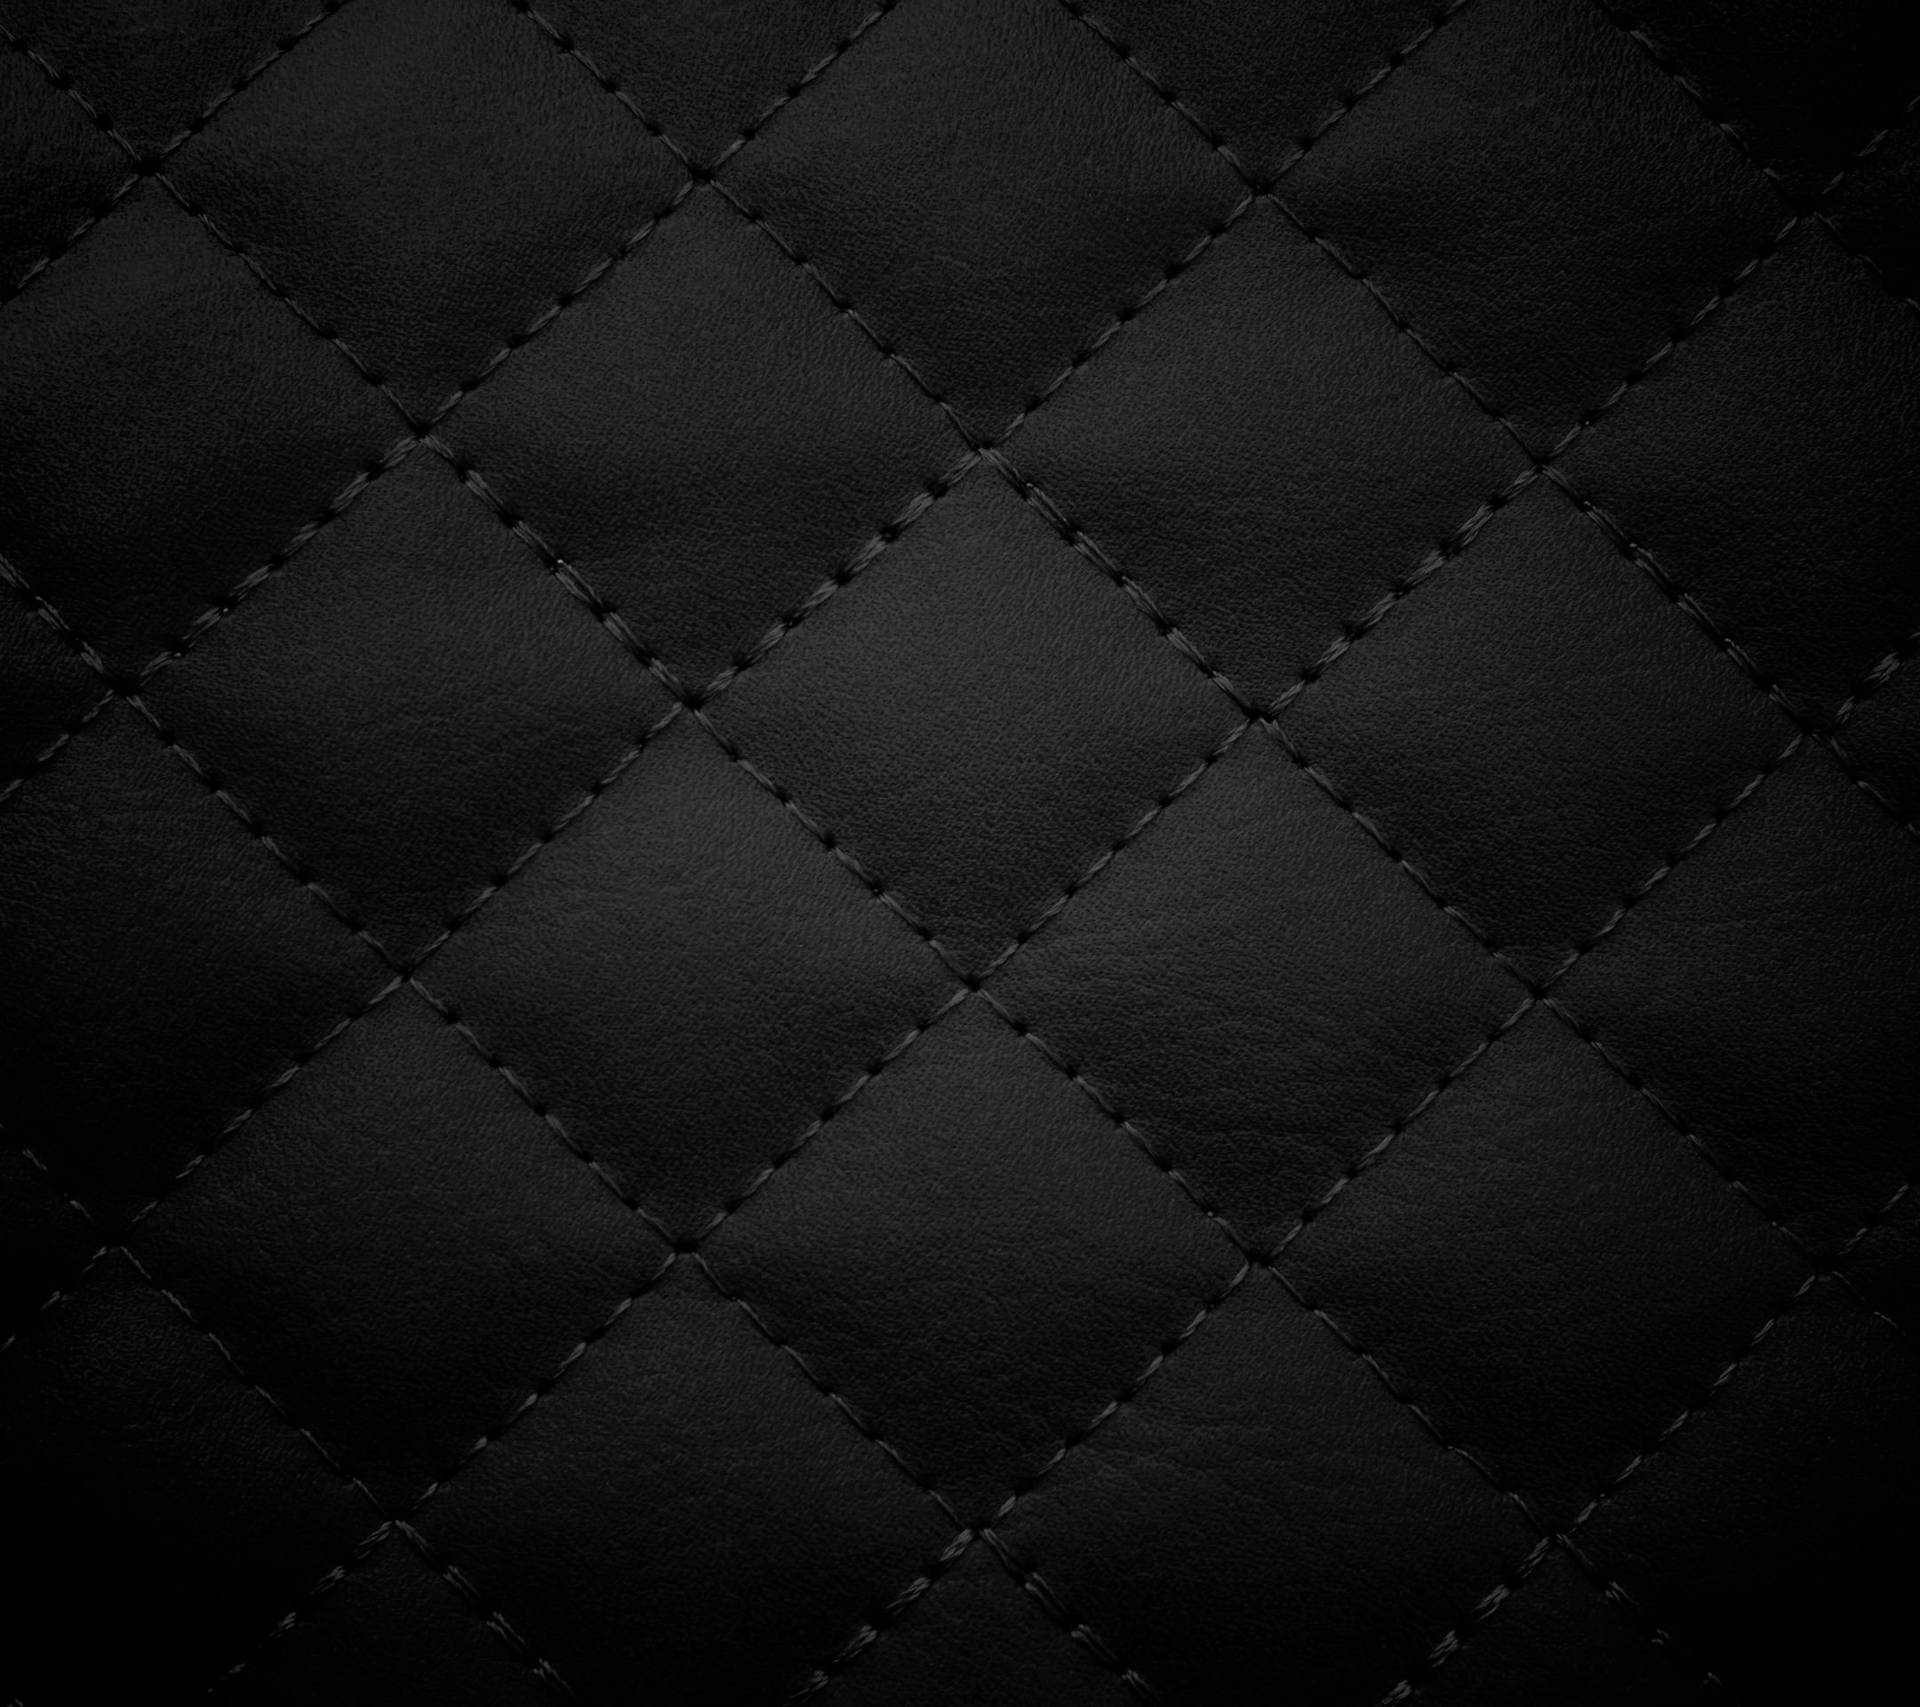 Quilted Leather Fabric Black Pattern Background